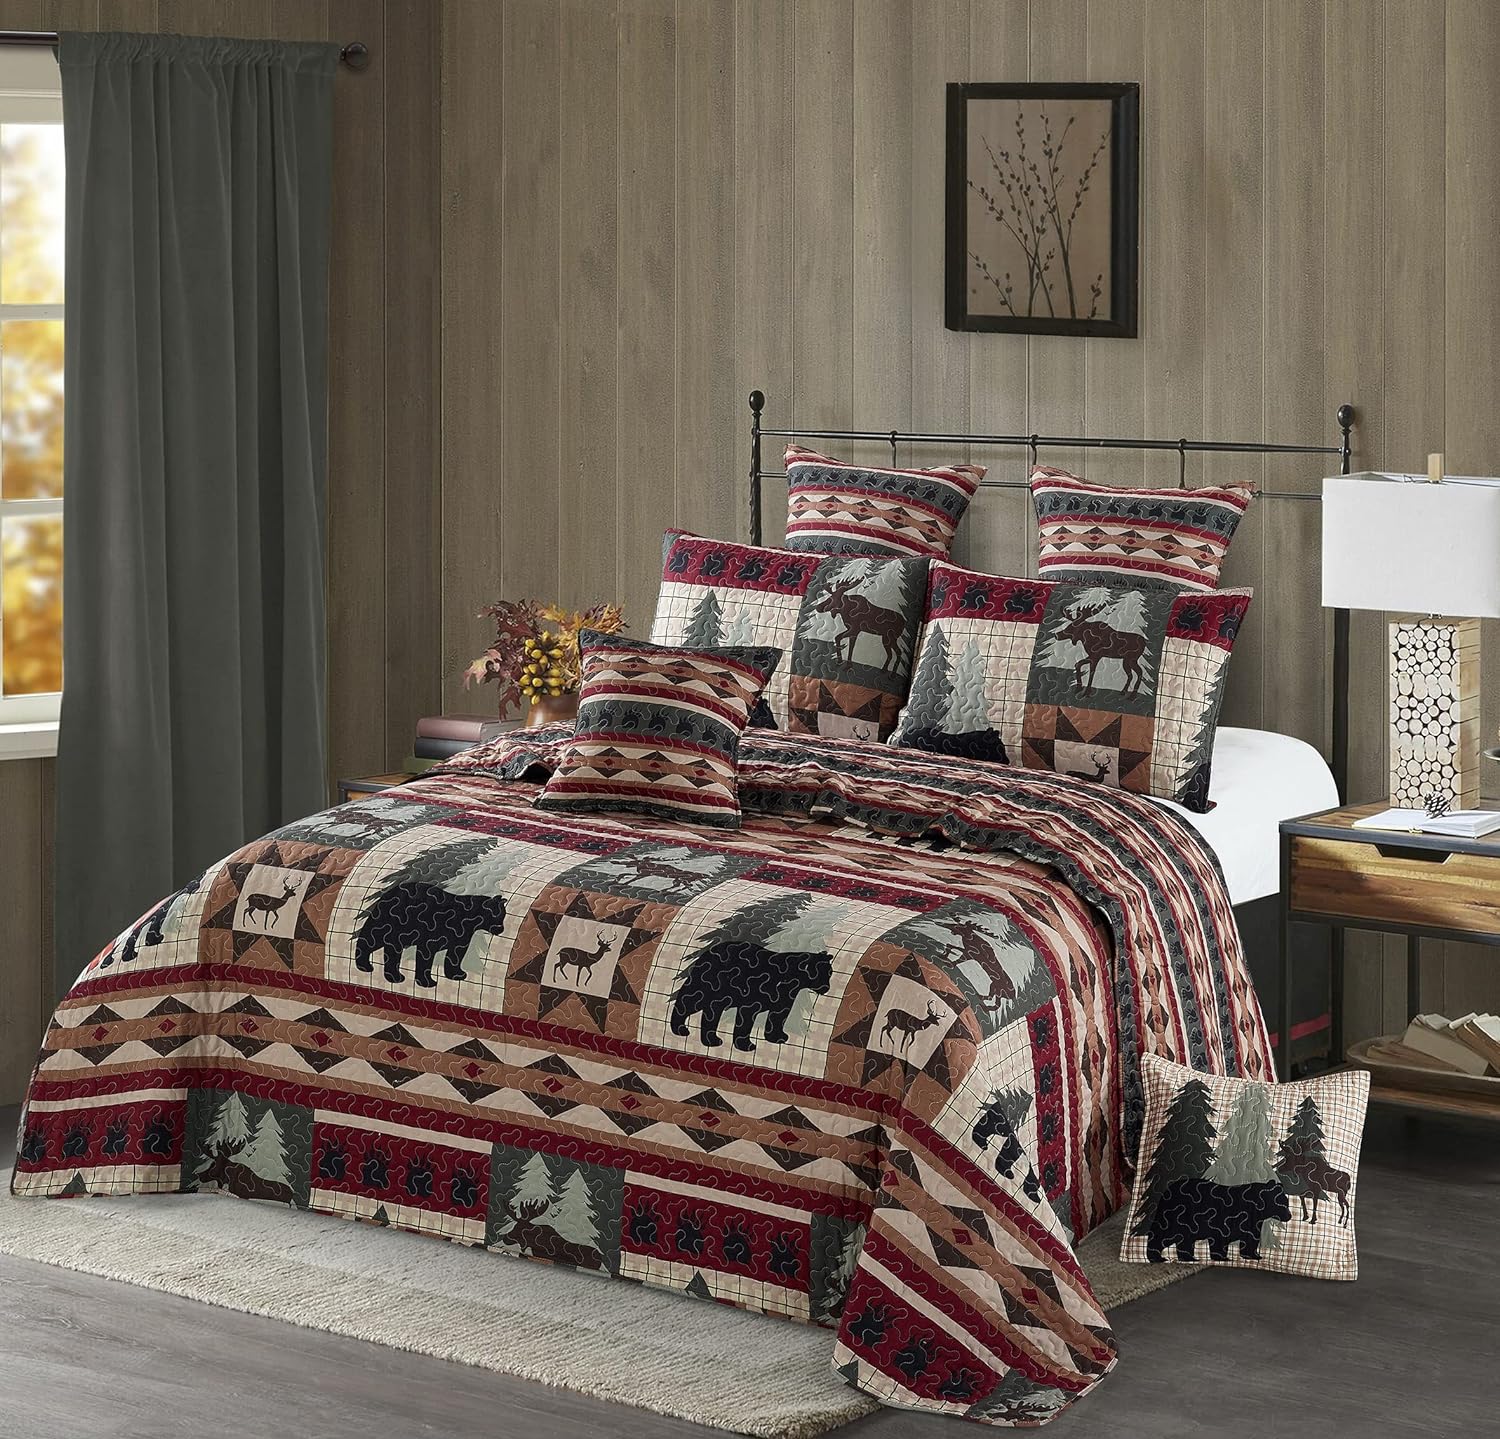 Virah Bella 3 Piece King Lodge Quilt Bedding Set - Wildlife Patch - Rustic Cabin Country Reversible Camping Comforter Set with Decorative Pillow Shams, Brown/Red